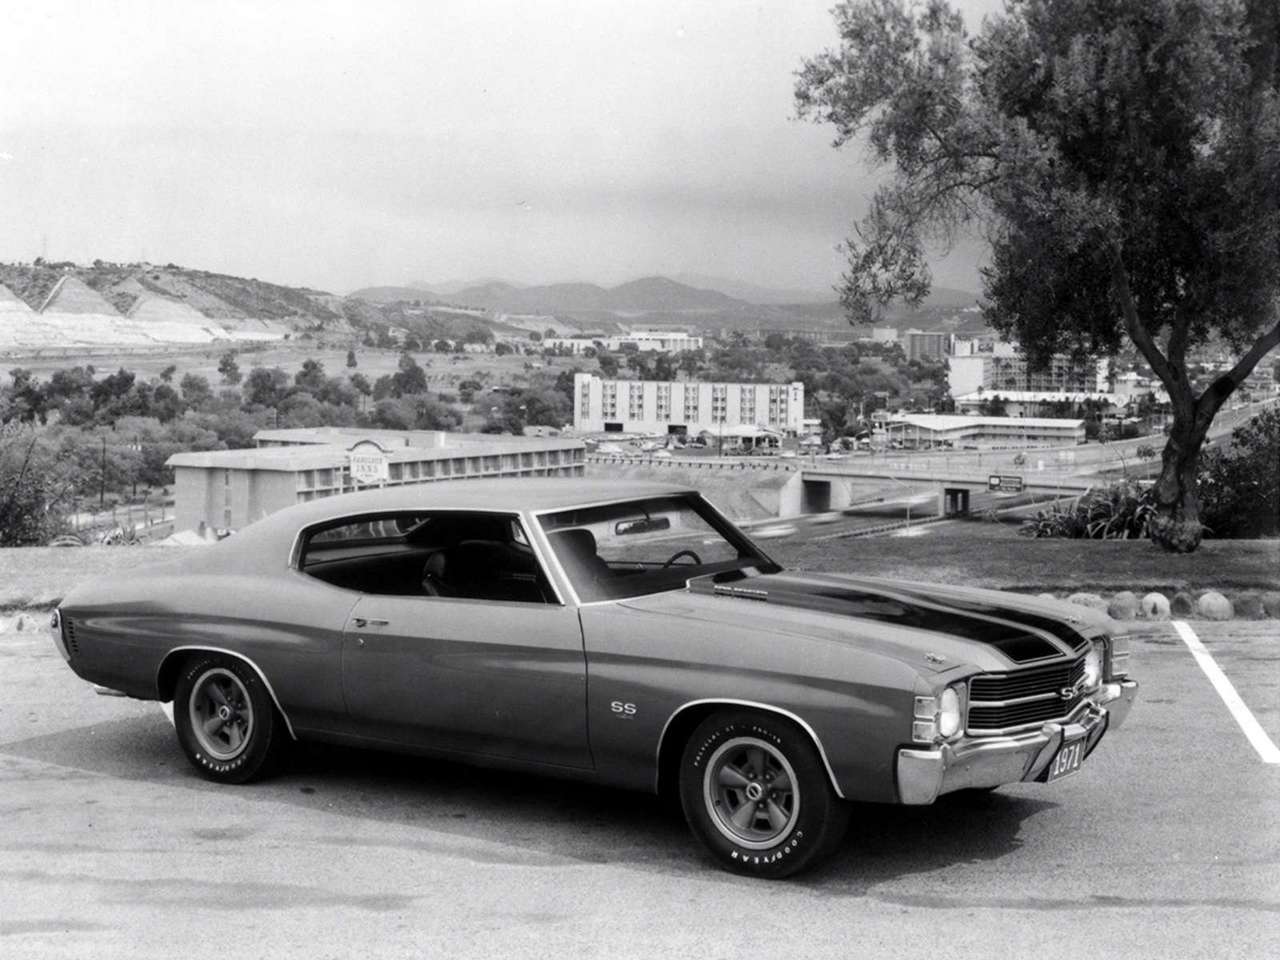 1969 Chevrolet Chevelle Ss 396 Wallpaper Wallpapers Backgrounds